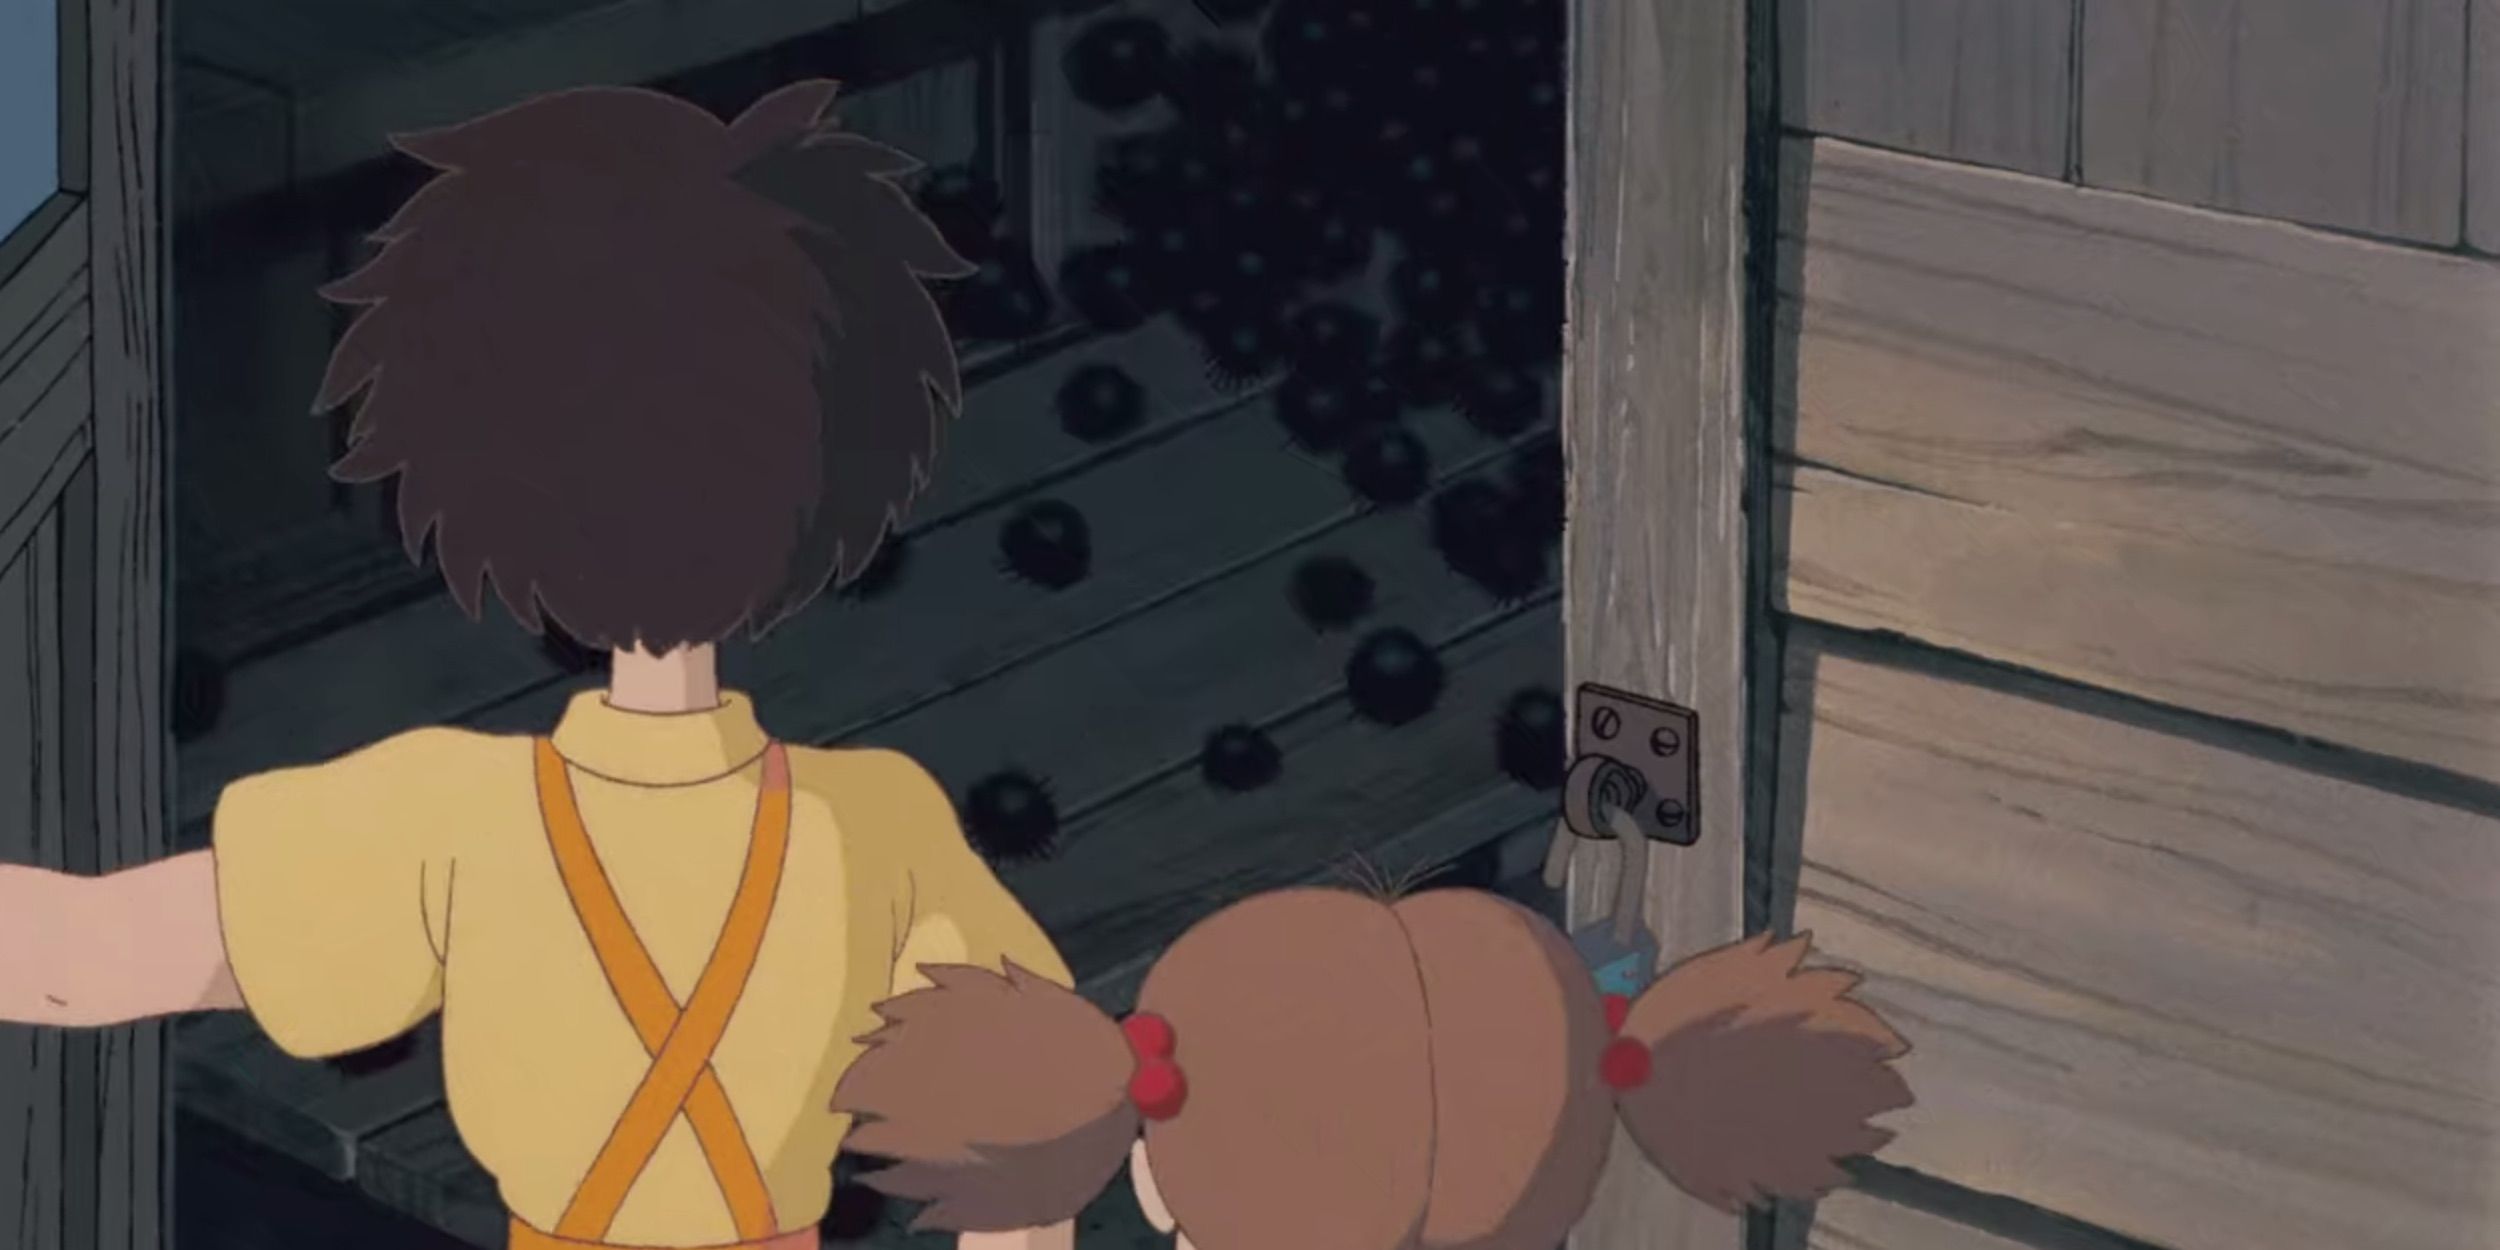 Mei and Satsuki open a door into darkness in their house in My Neighbor Totoro